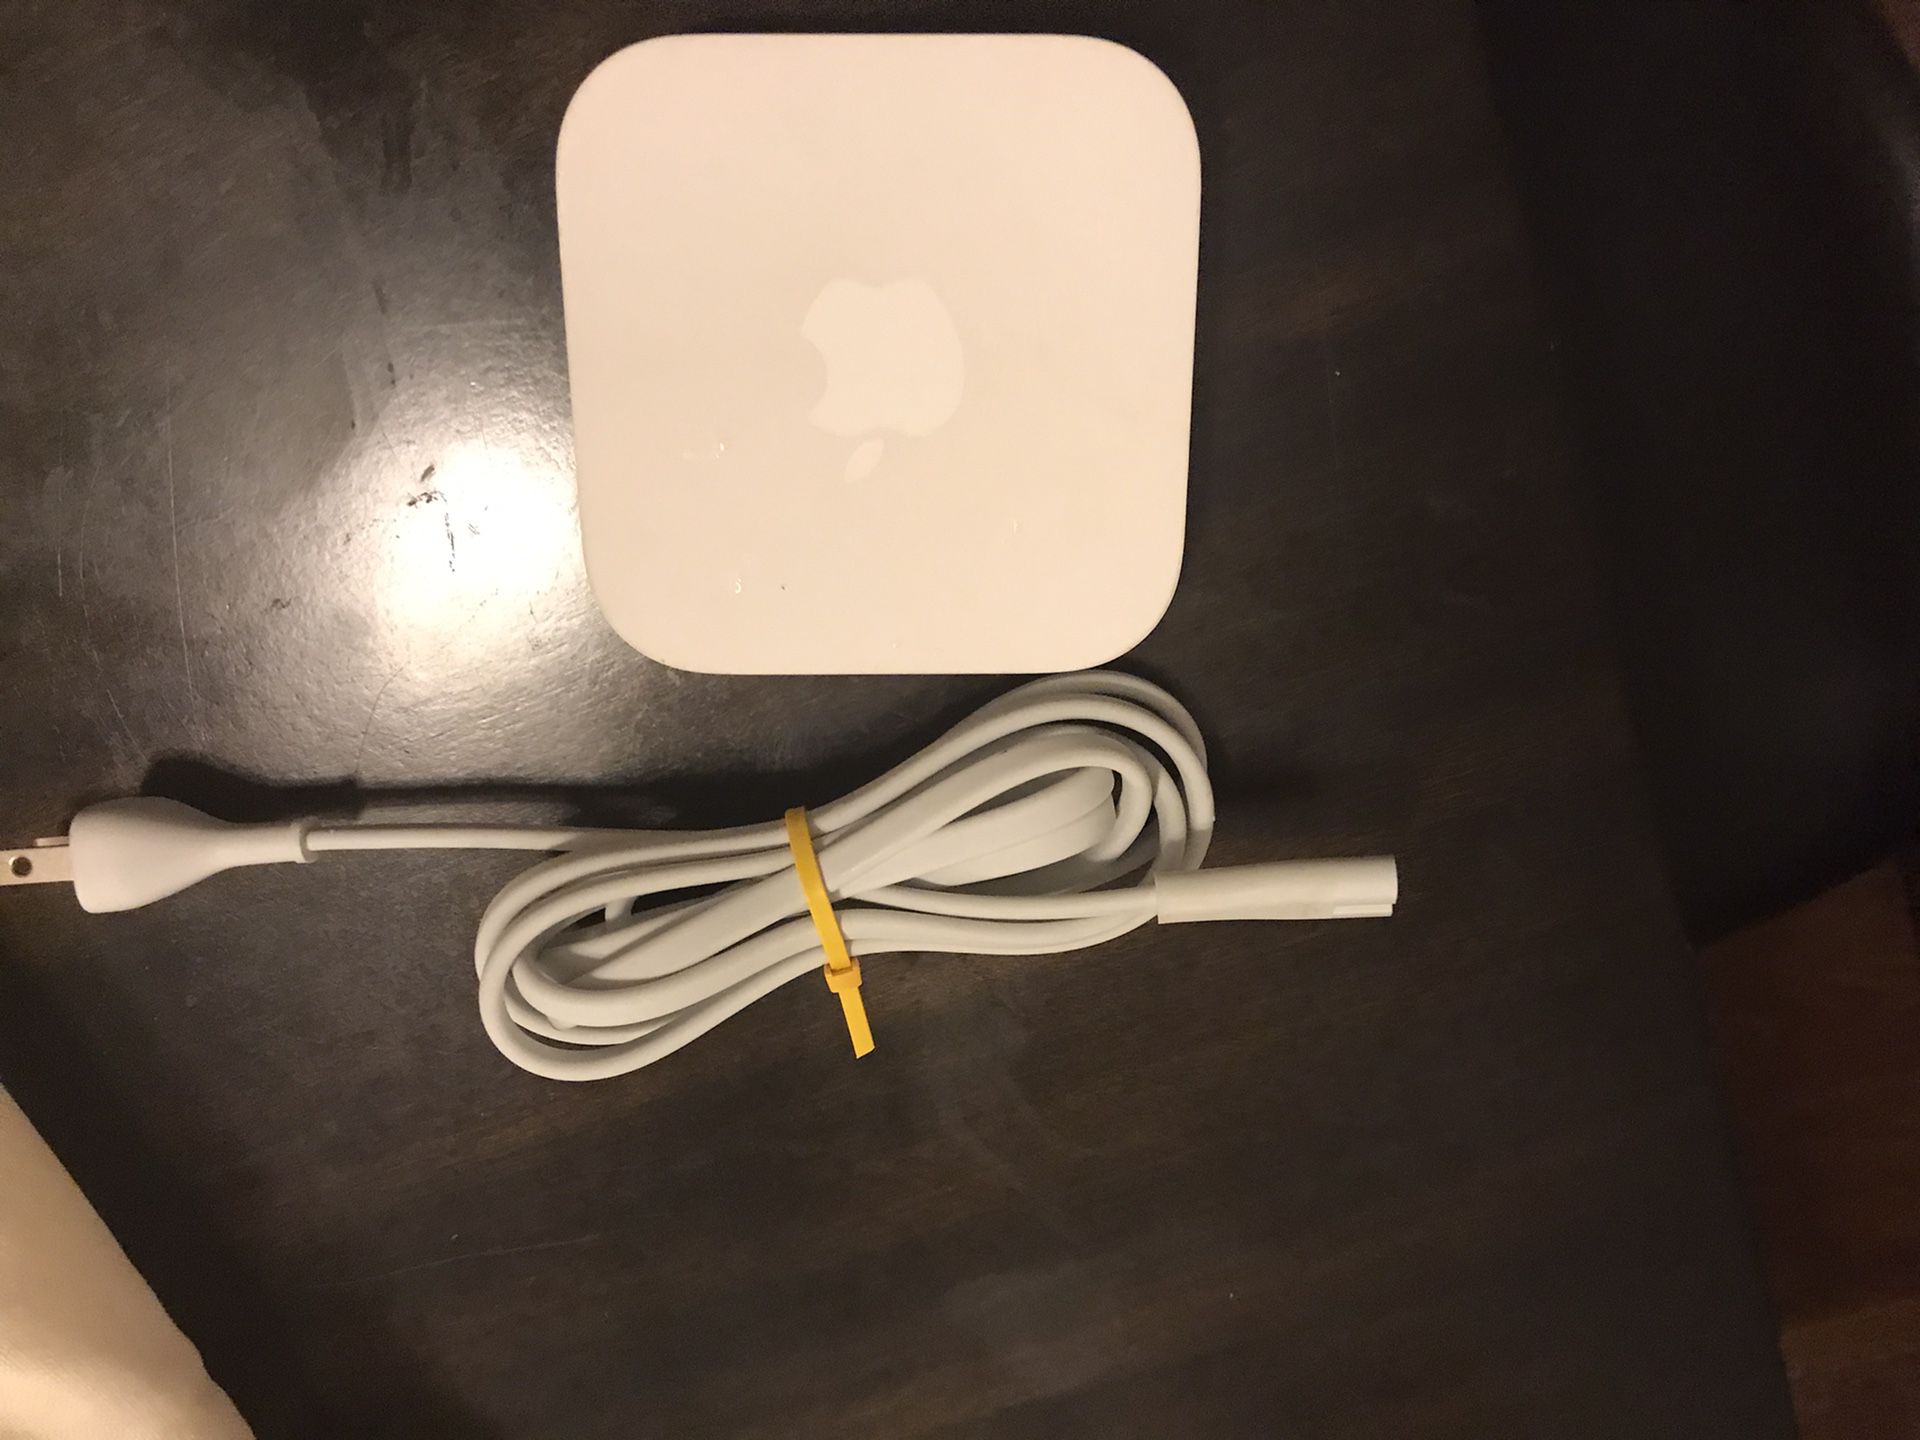 Apple airport WiFi router